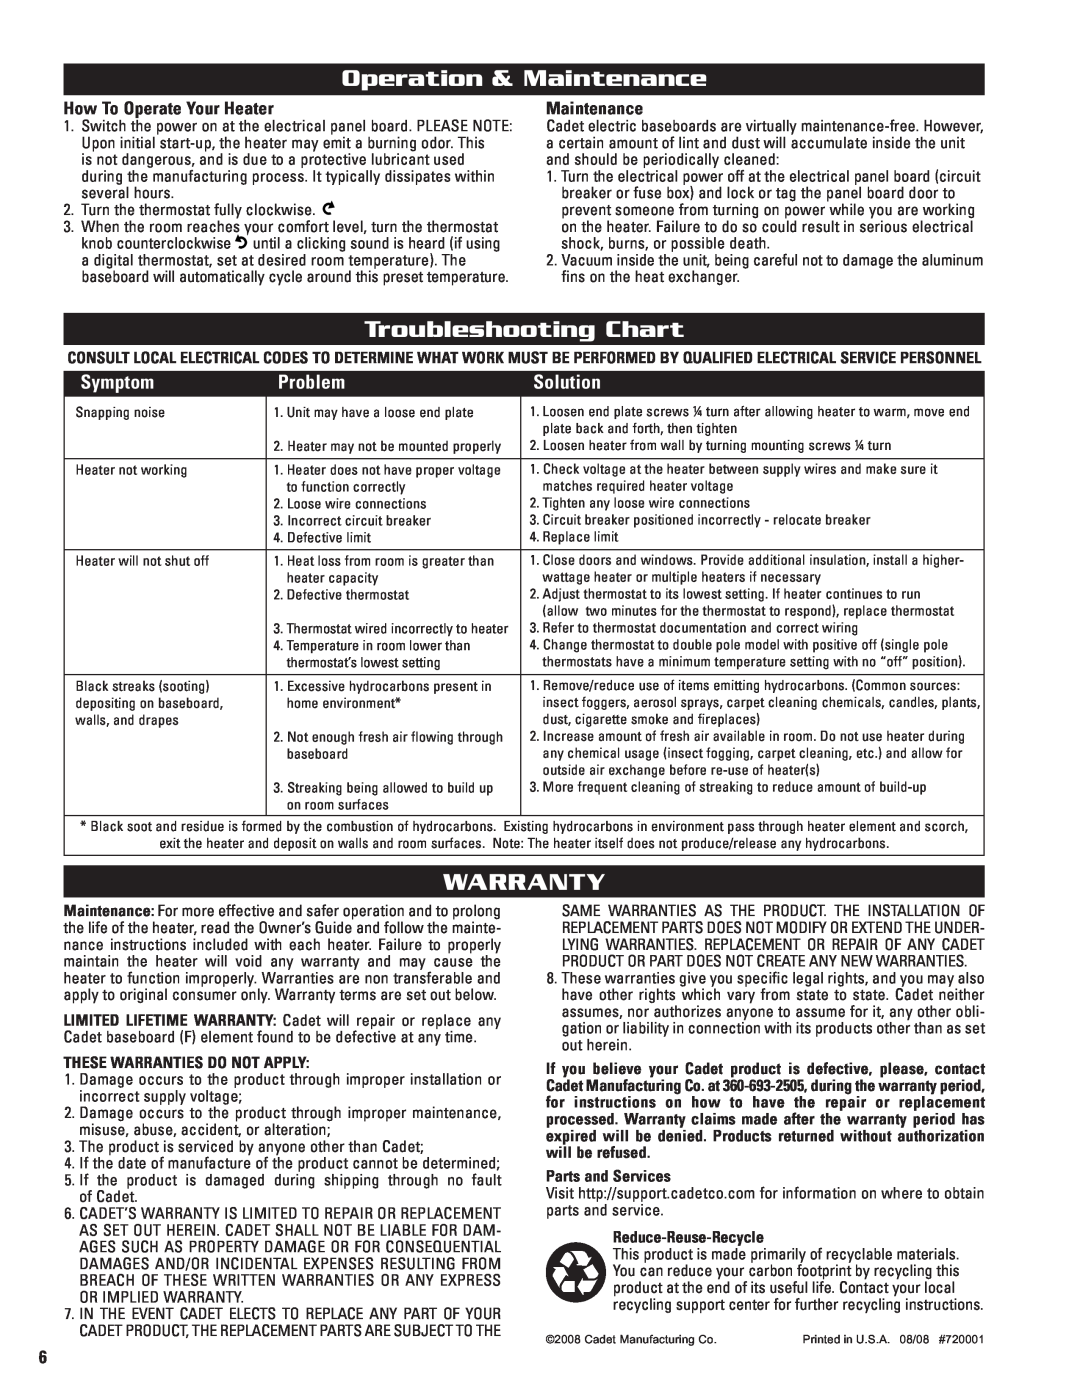 Cadet 2F500 Operation & Maintenance, Troubleshooting Chart, Warranty, Symptom, Problem, Solution, Parts and Services 